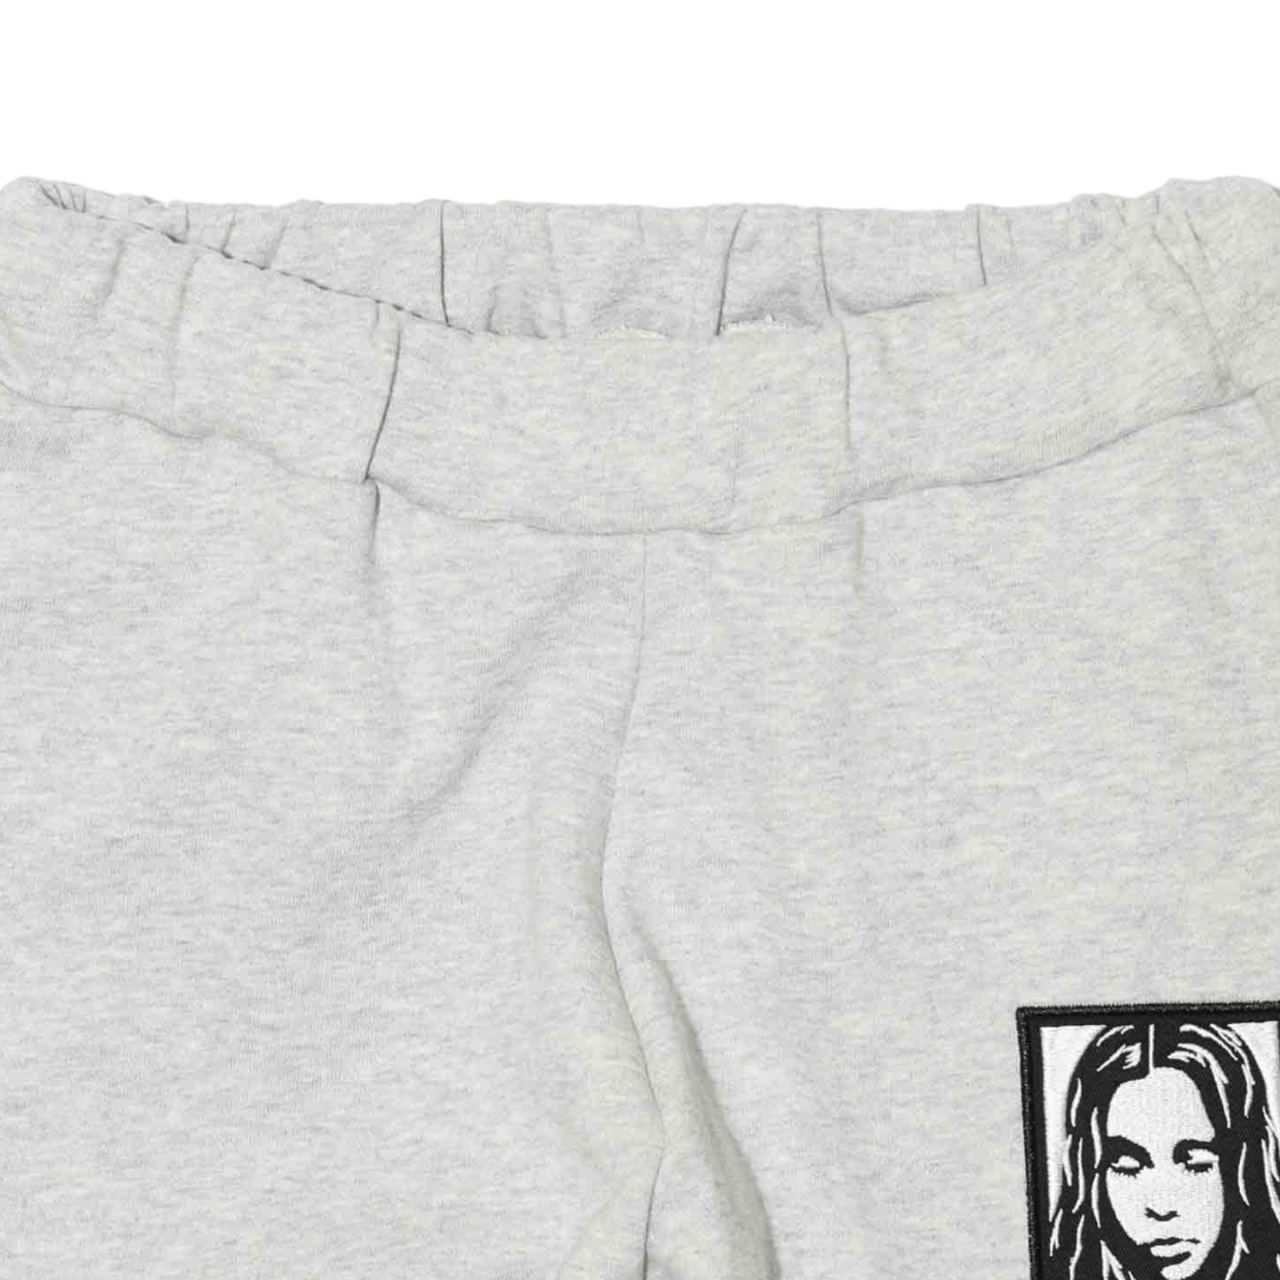 【X-girl】FACE PATCH SWEAT PANTS【エックスガール】